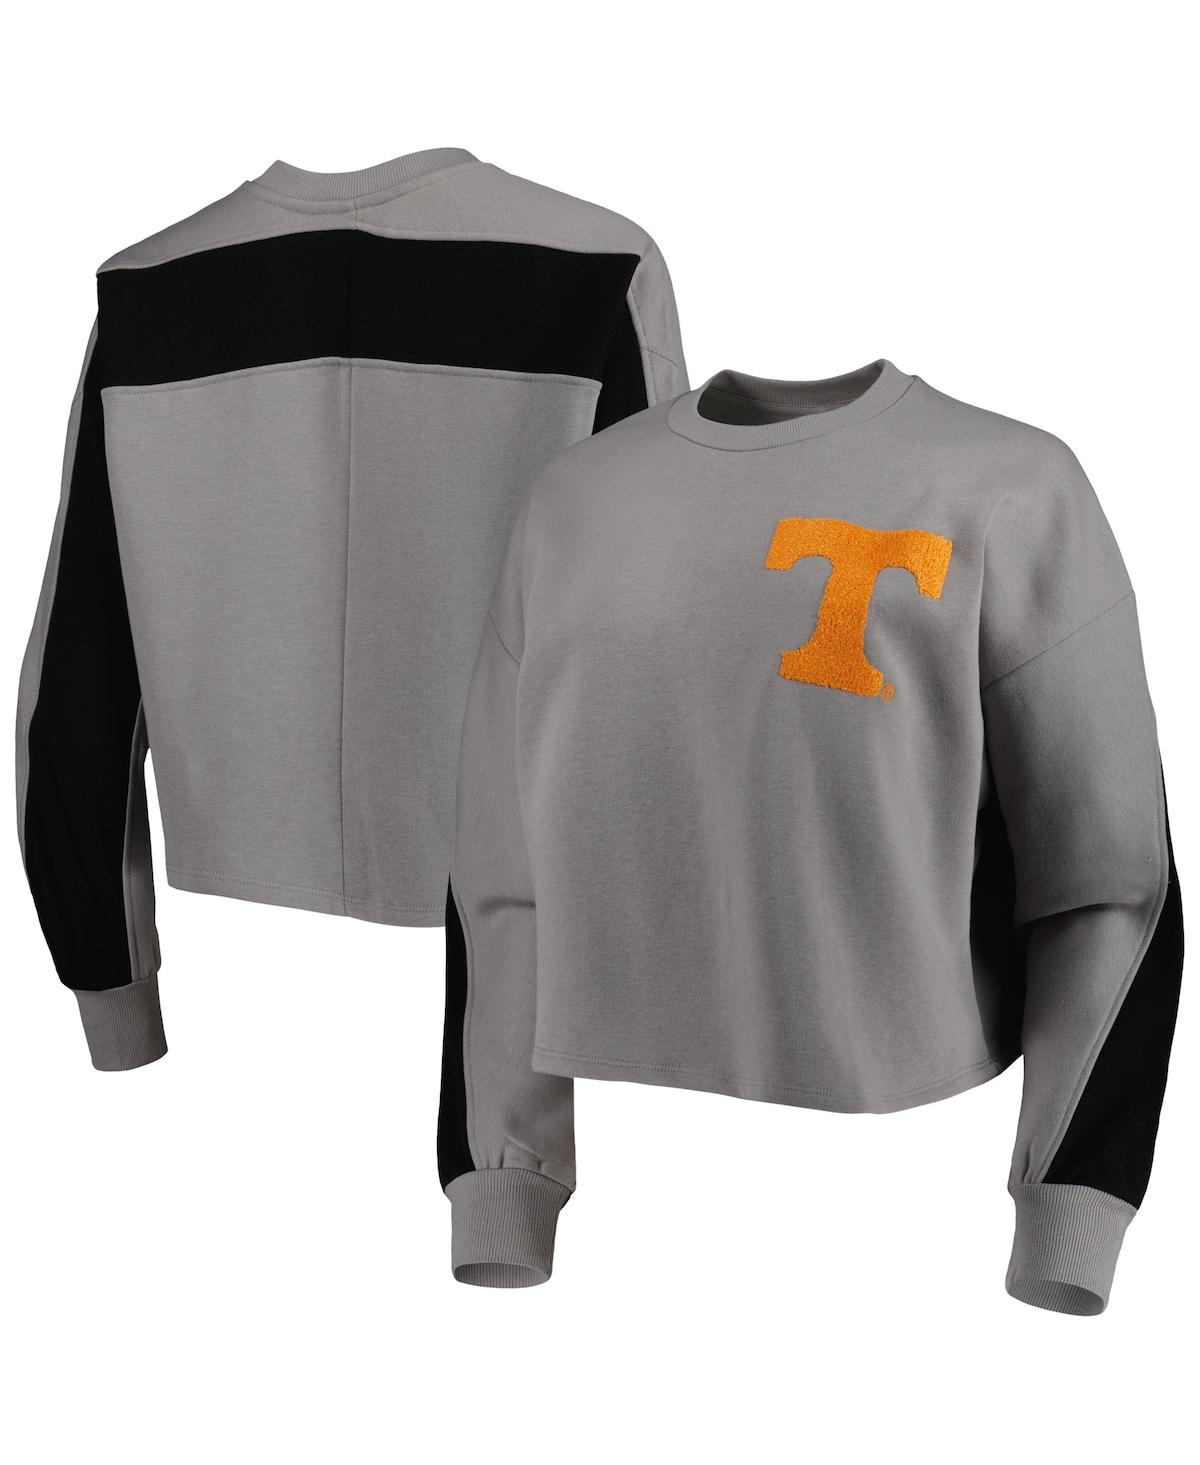 GAMEDAY COUTURE WOMEN'S GAMEDAY COUTURE GRAY TENNESSEE VOLUNTEERS BACK TO REALITY COLORBLOCK PULLOVER SWEATSHIRT